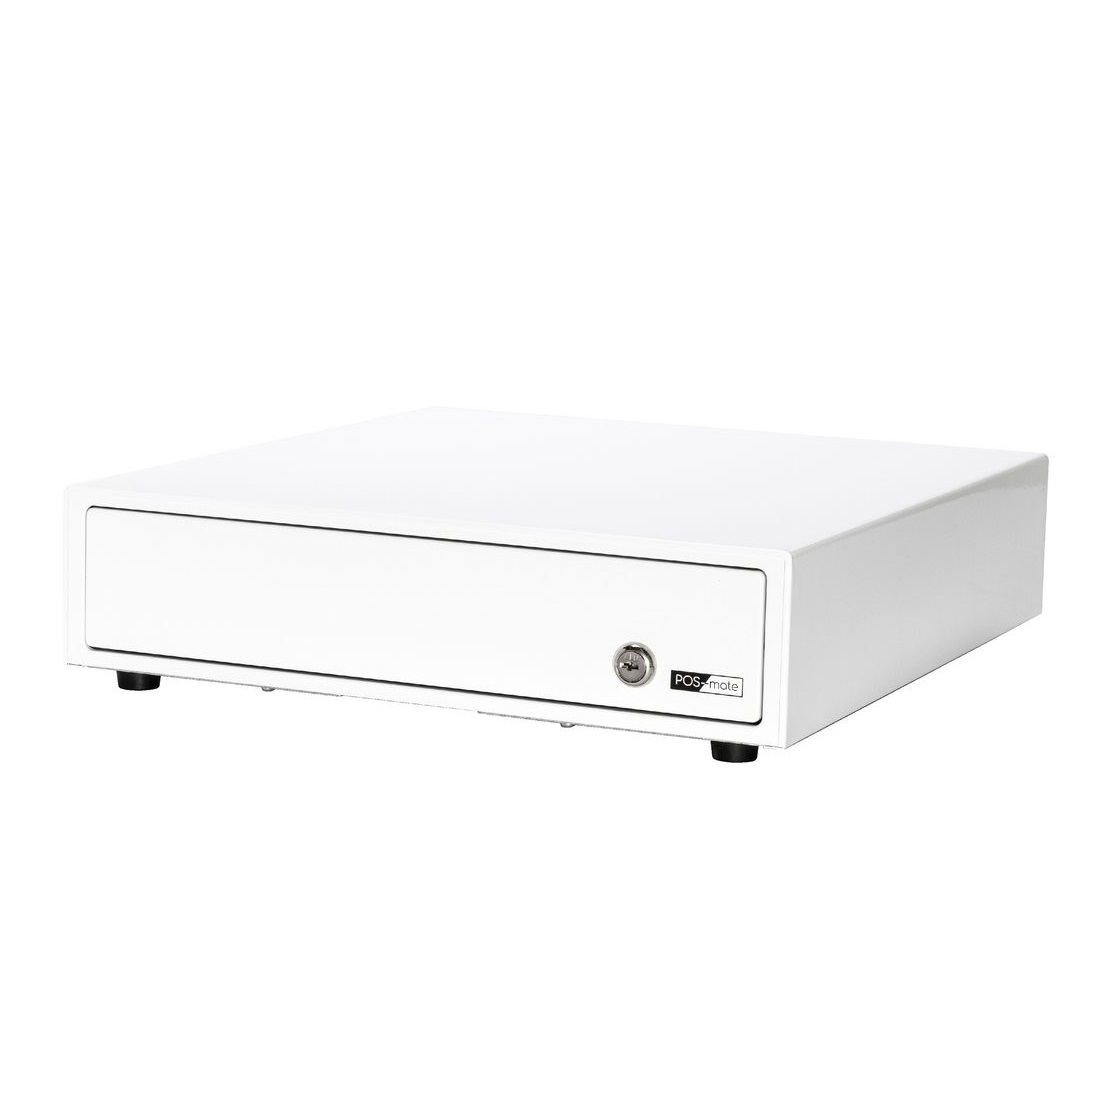 View POS-Mate Compact Manual Cash Drawer Gloss White